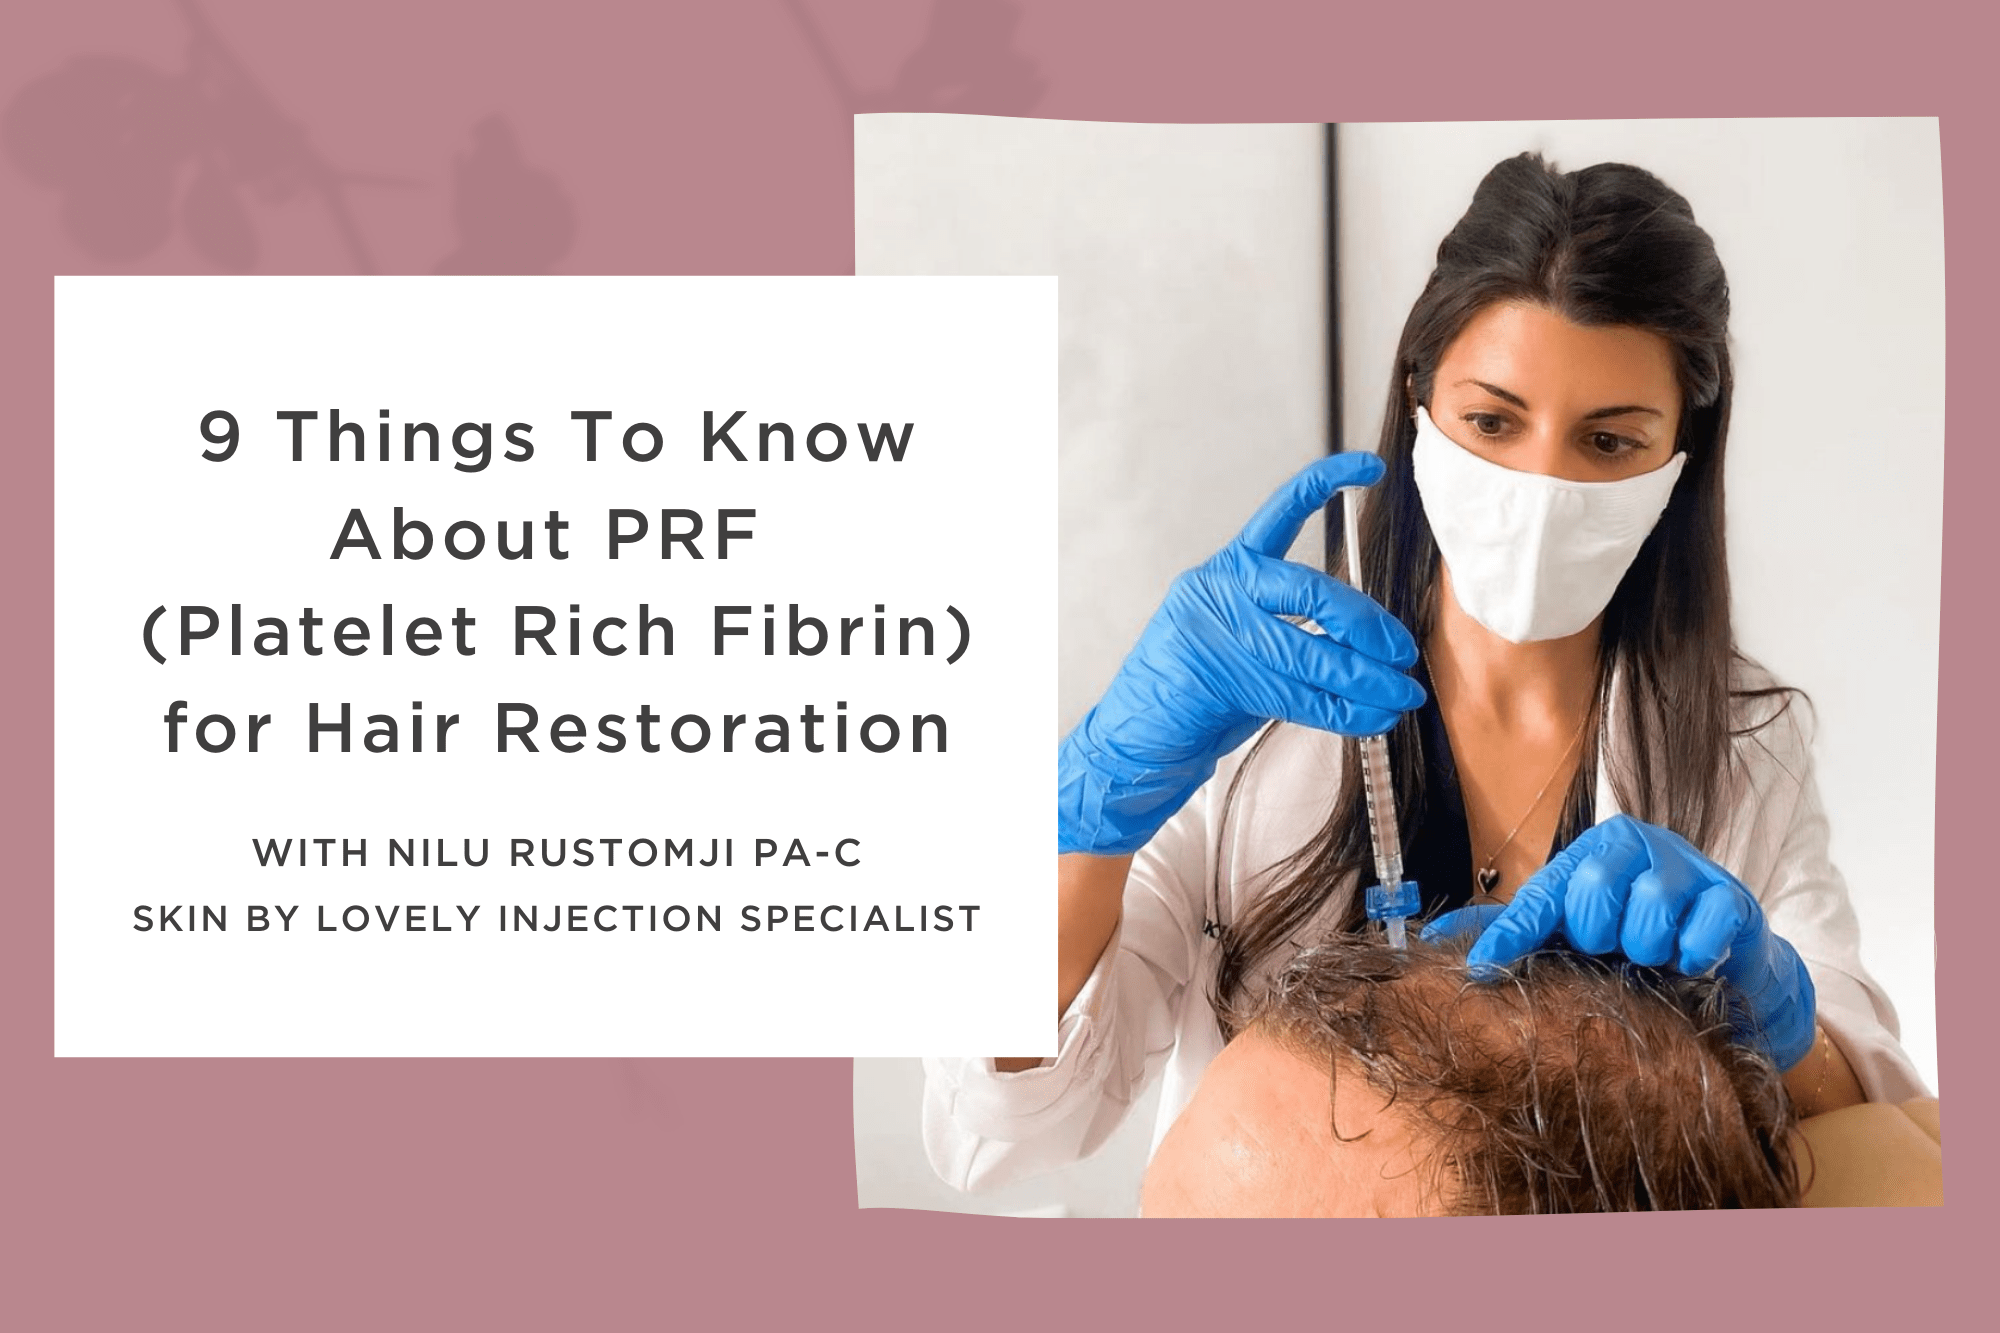 9 Things To Know About PRF (Platelet Rich Fibrin) for Hair Restoration with Nilu Rustomji PA-C